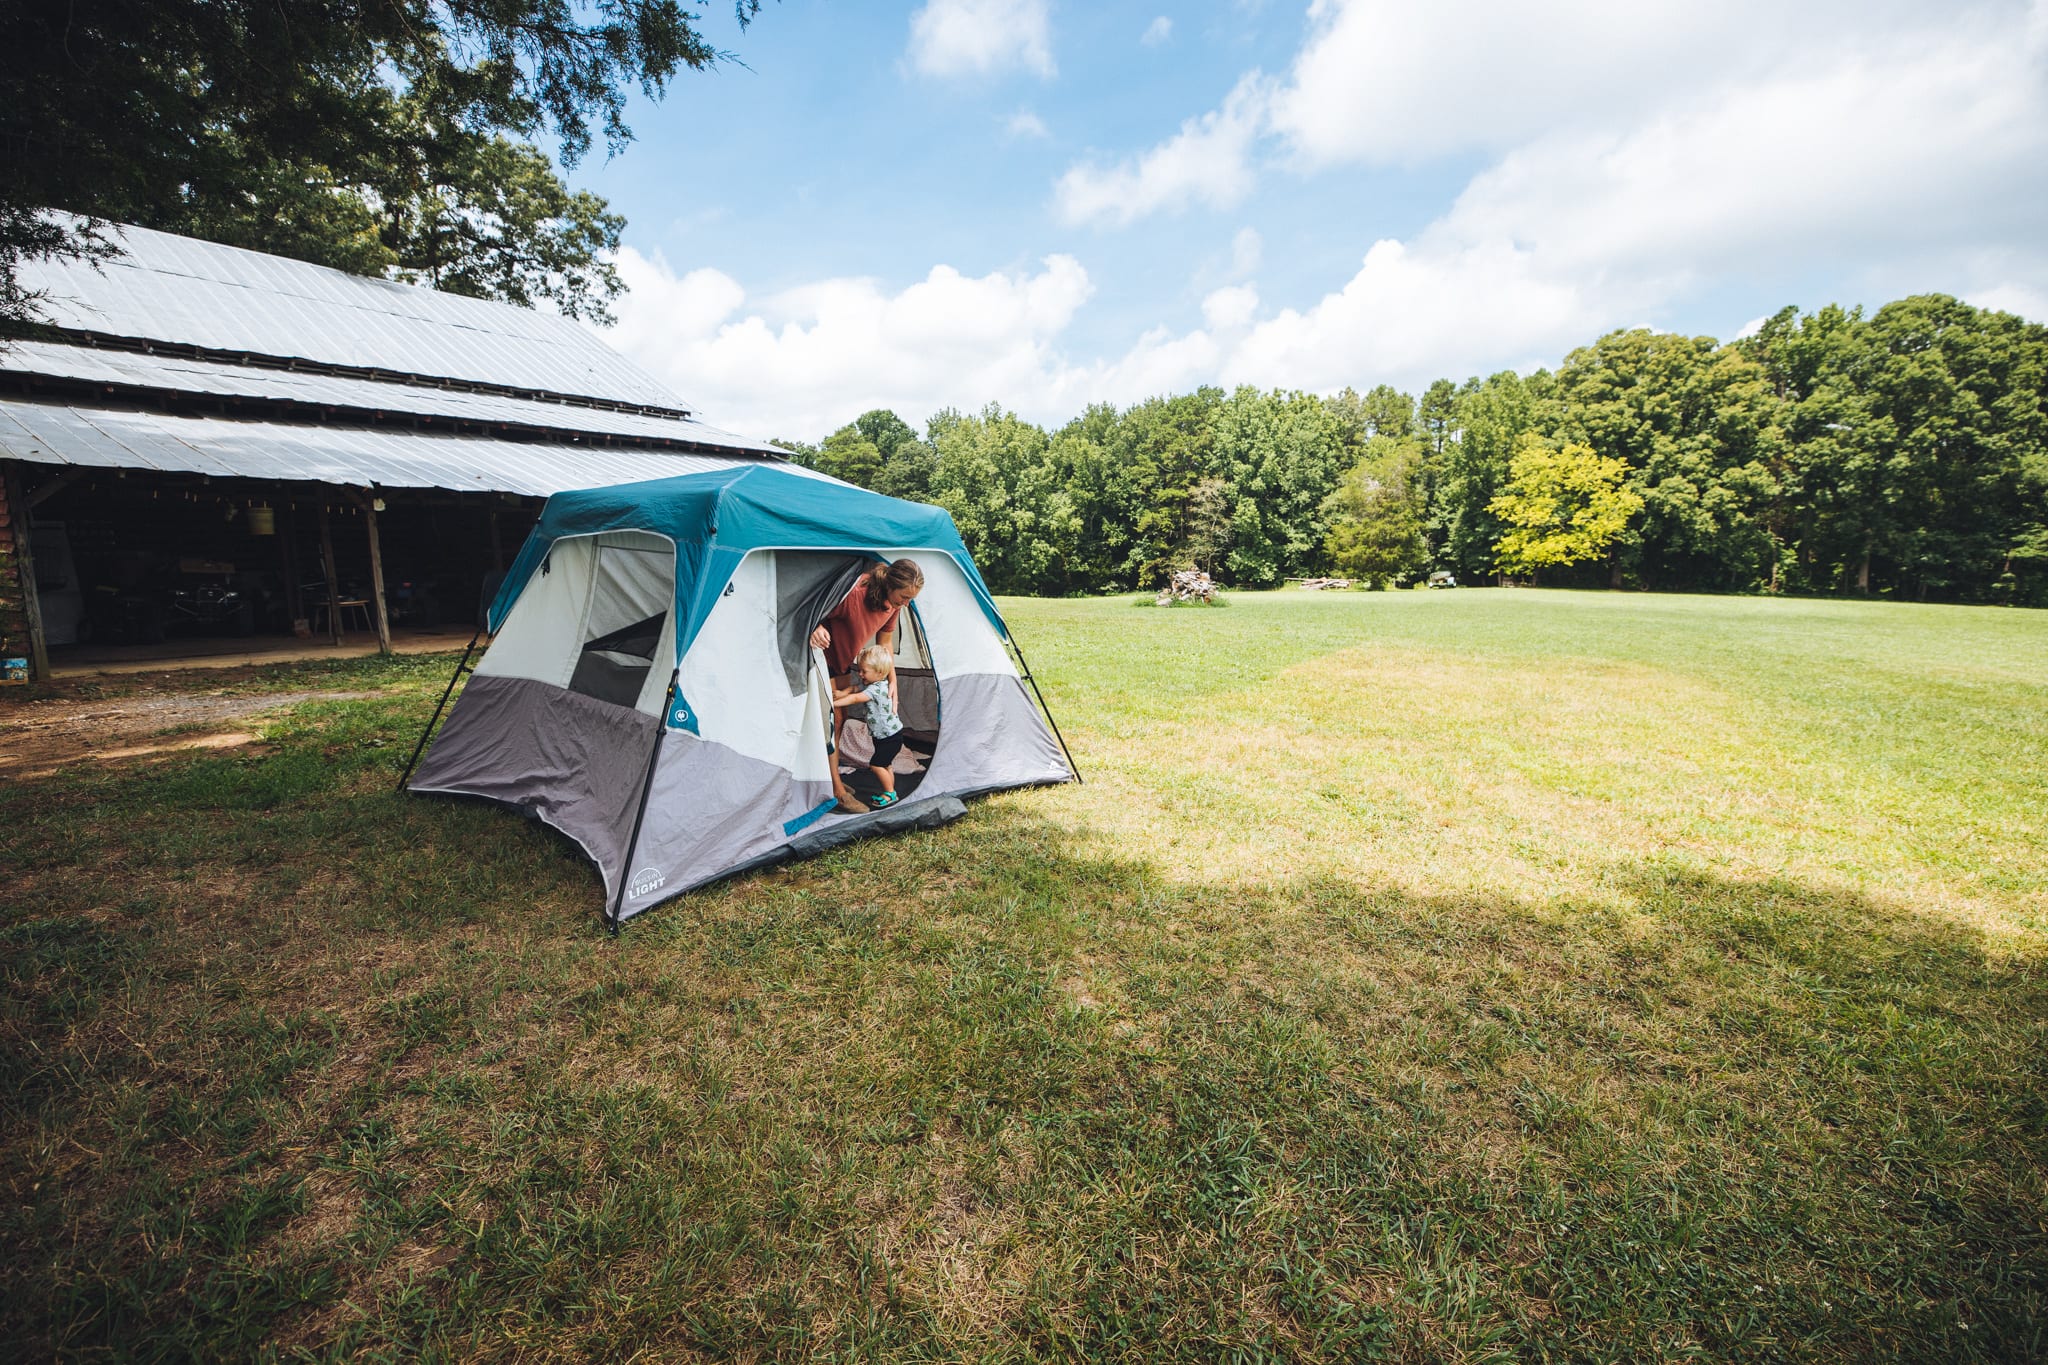 Set up your tent near the barn (kitchen + bathrooms) or near the back of the property for more privacy. Room to roam!